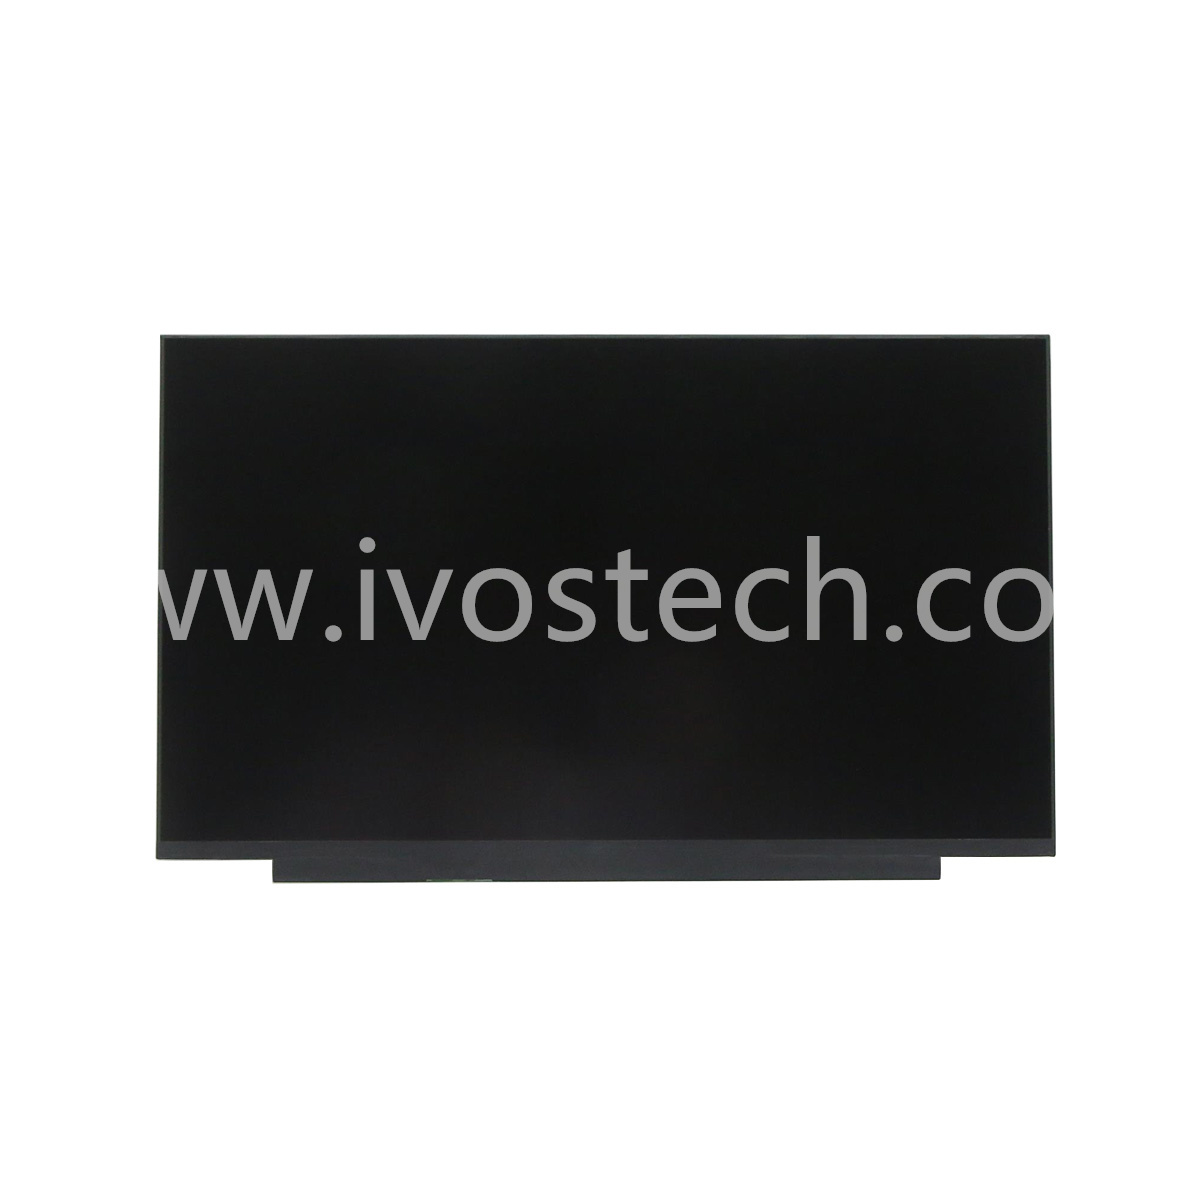 5D10W46422 15.6” FHD Laptop LCD Screen Display for Lenovo ThinkBook 15 G2 ARE Type 20VG